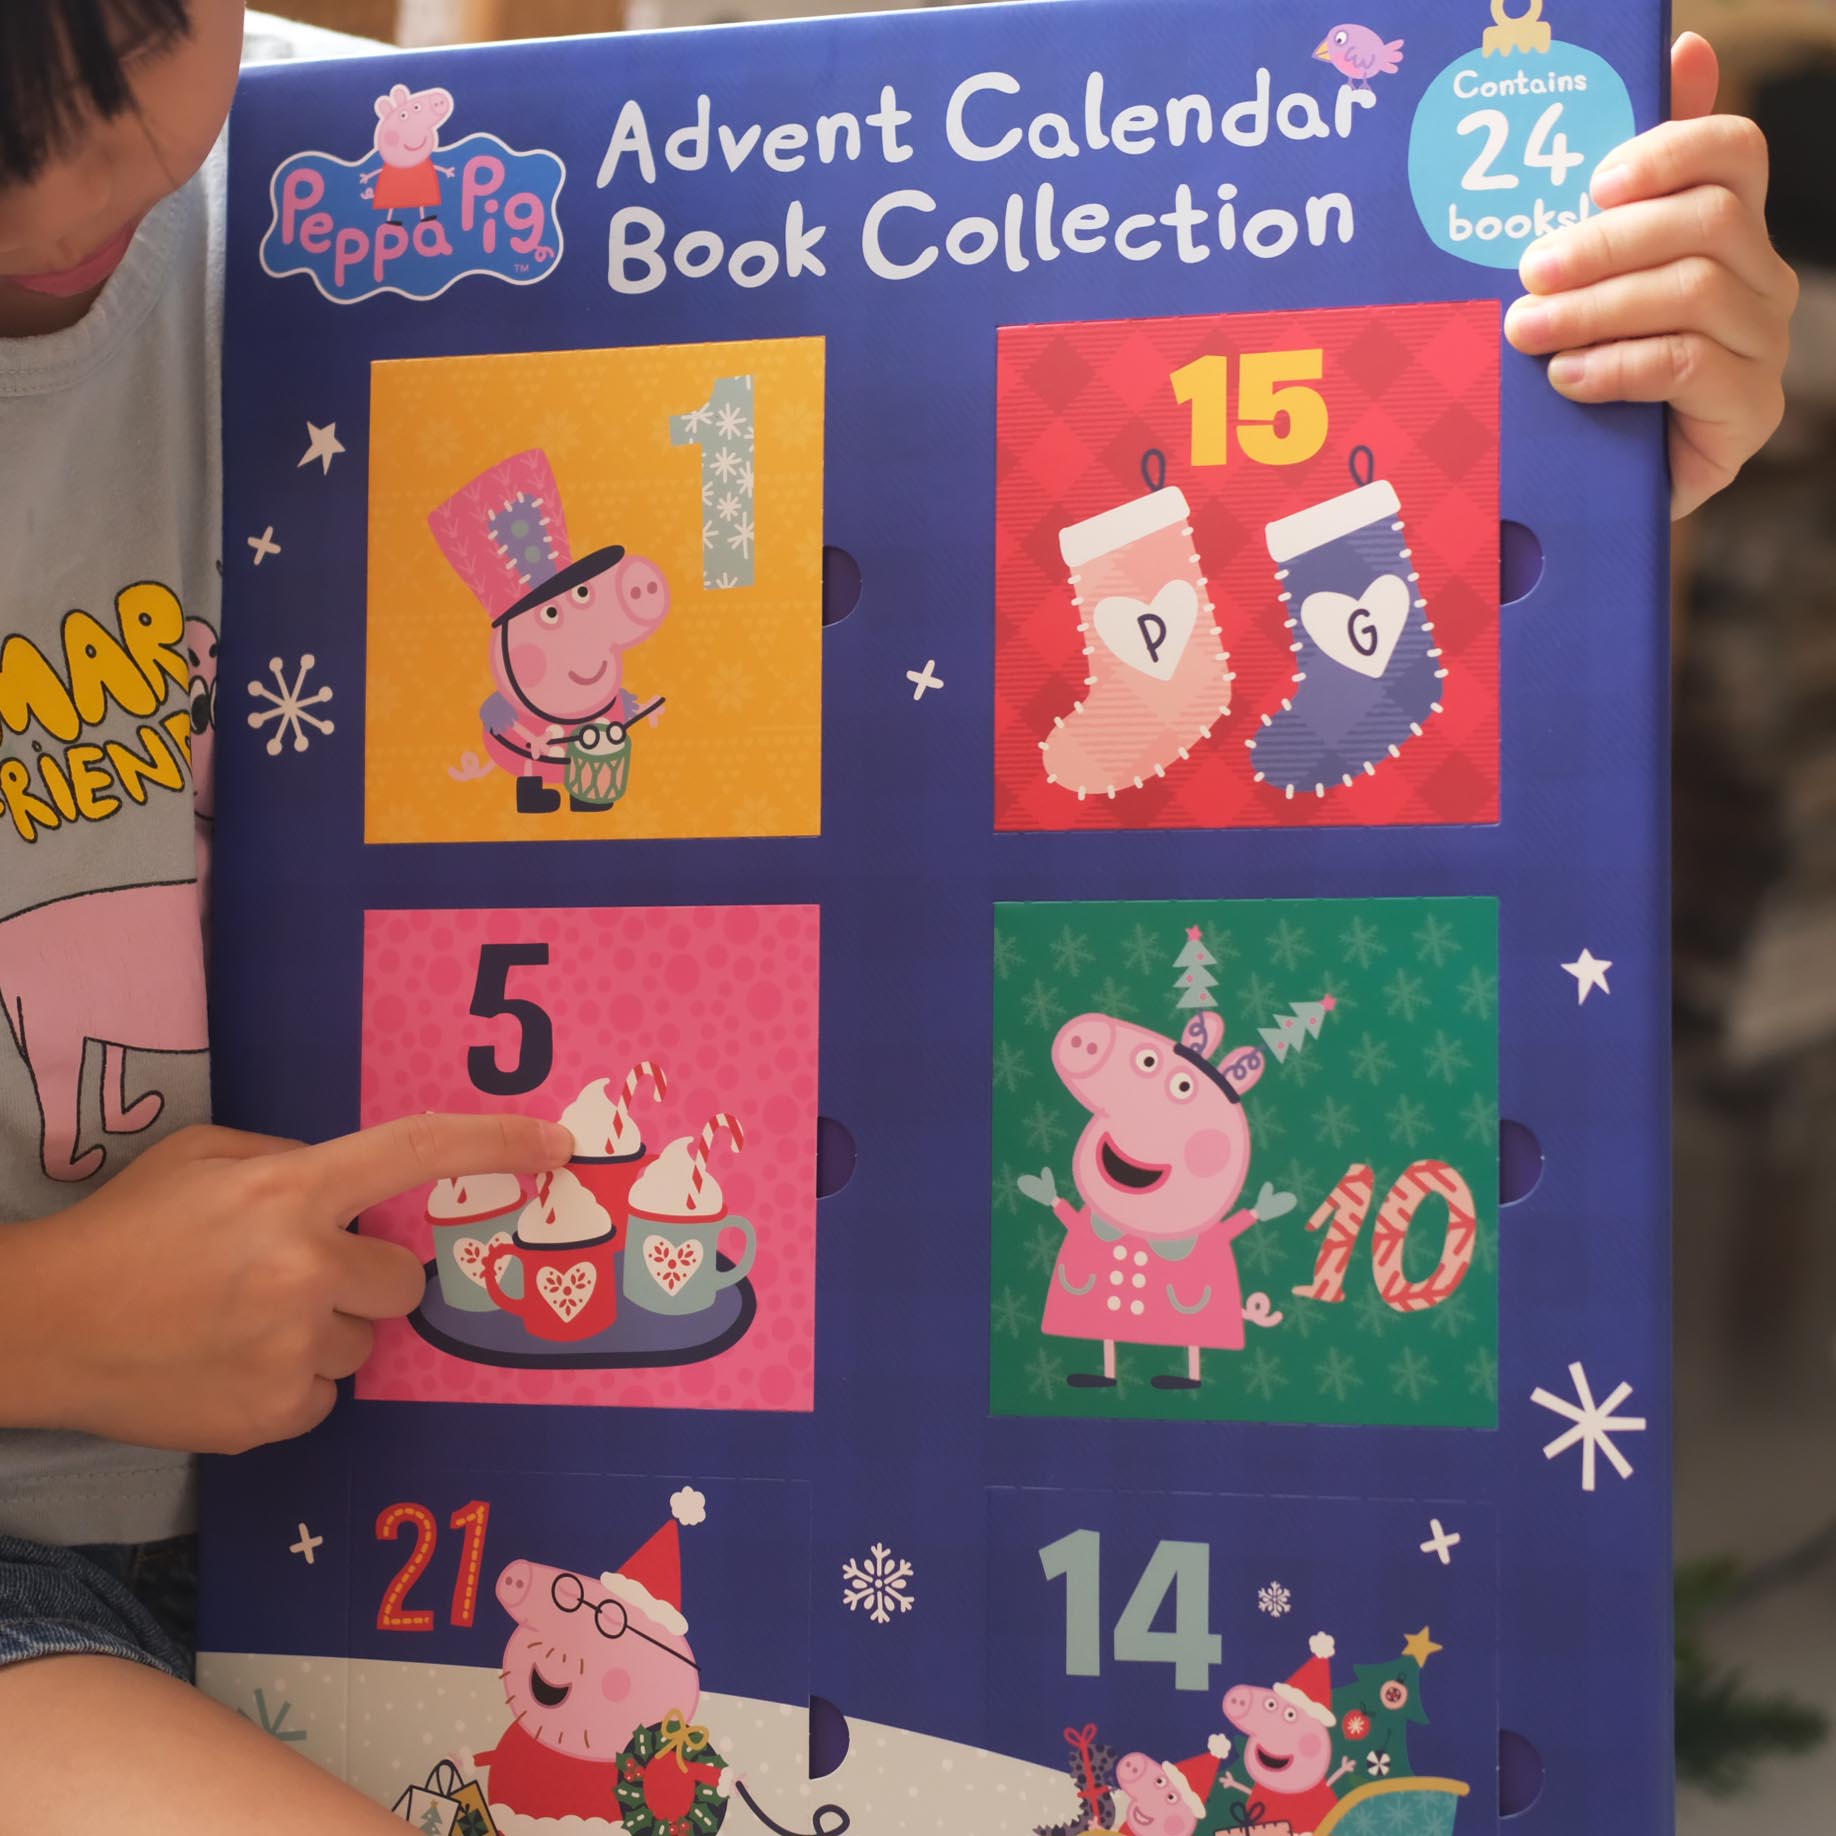 🎅Peppa Pig Advent Calendar Book Collection - DAY 17